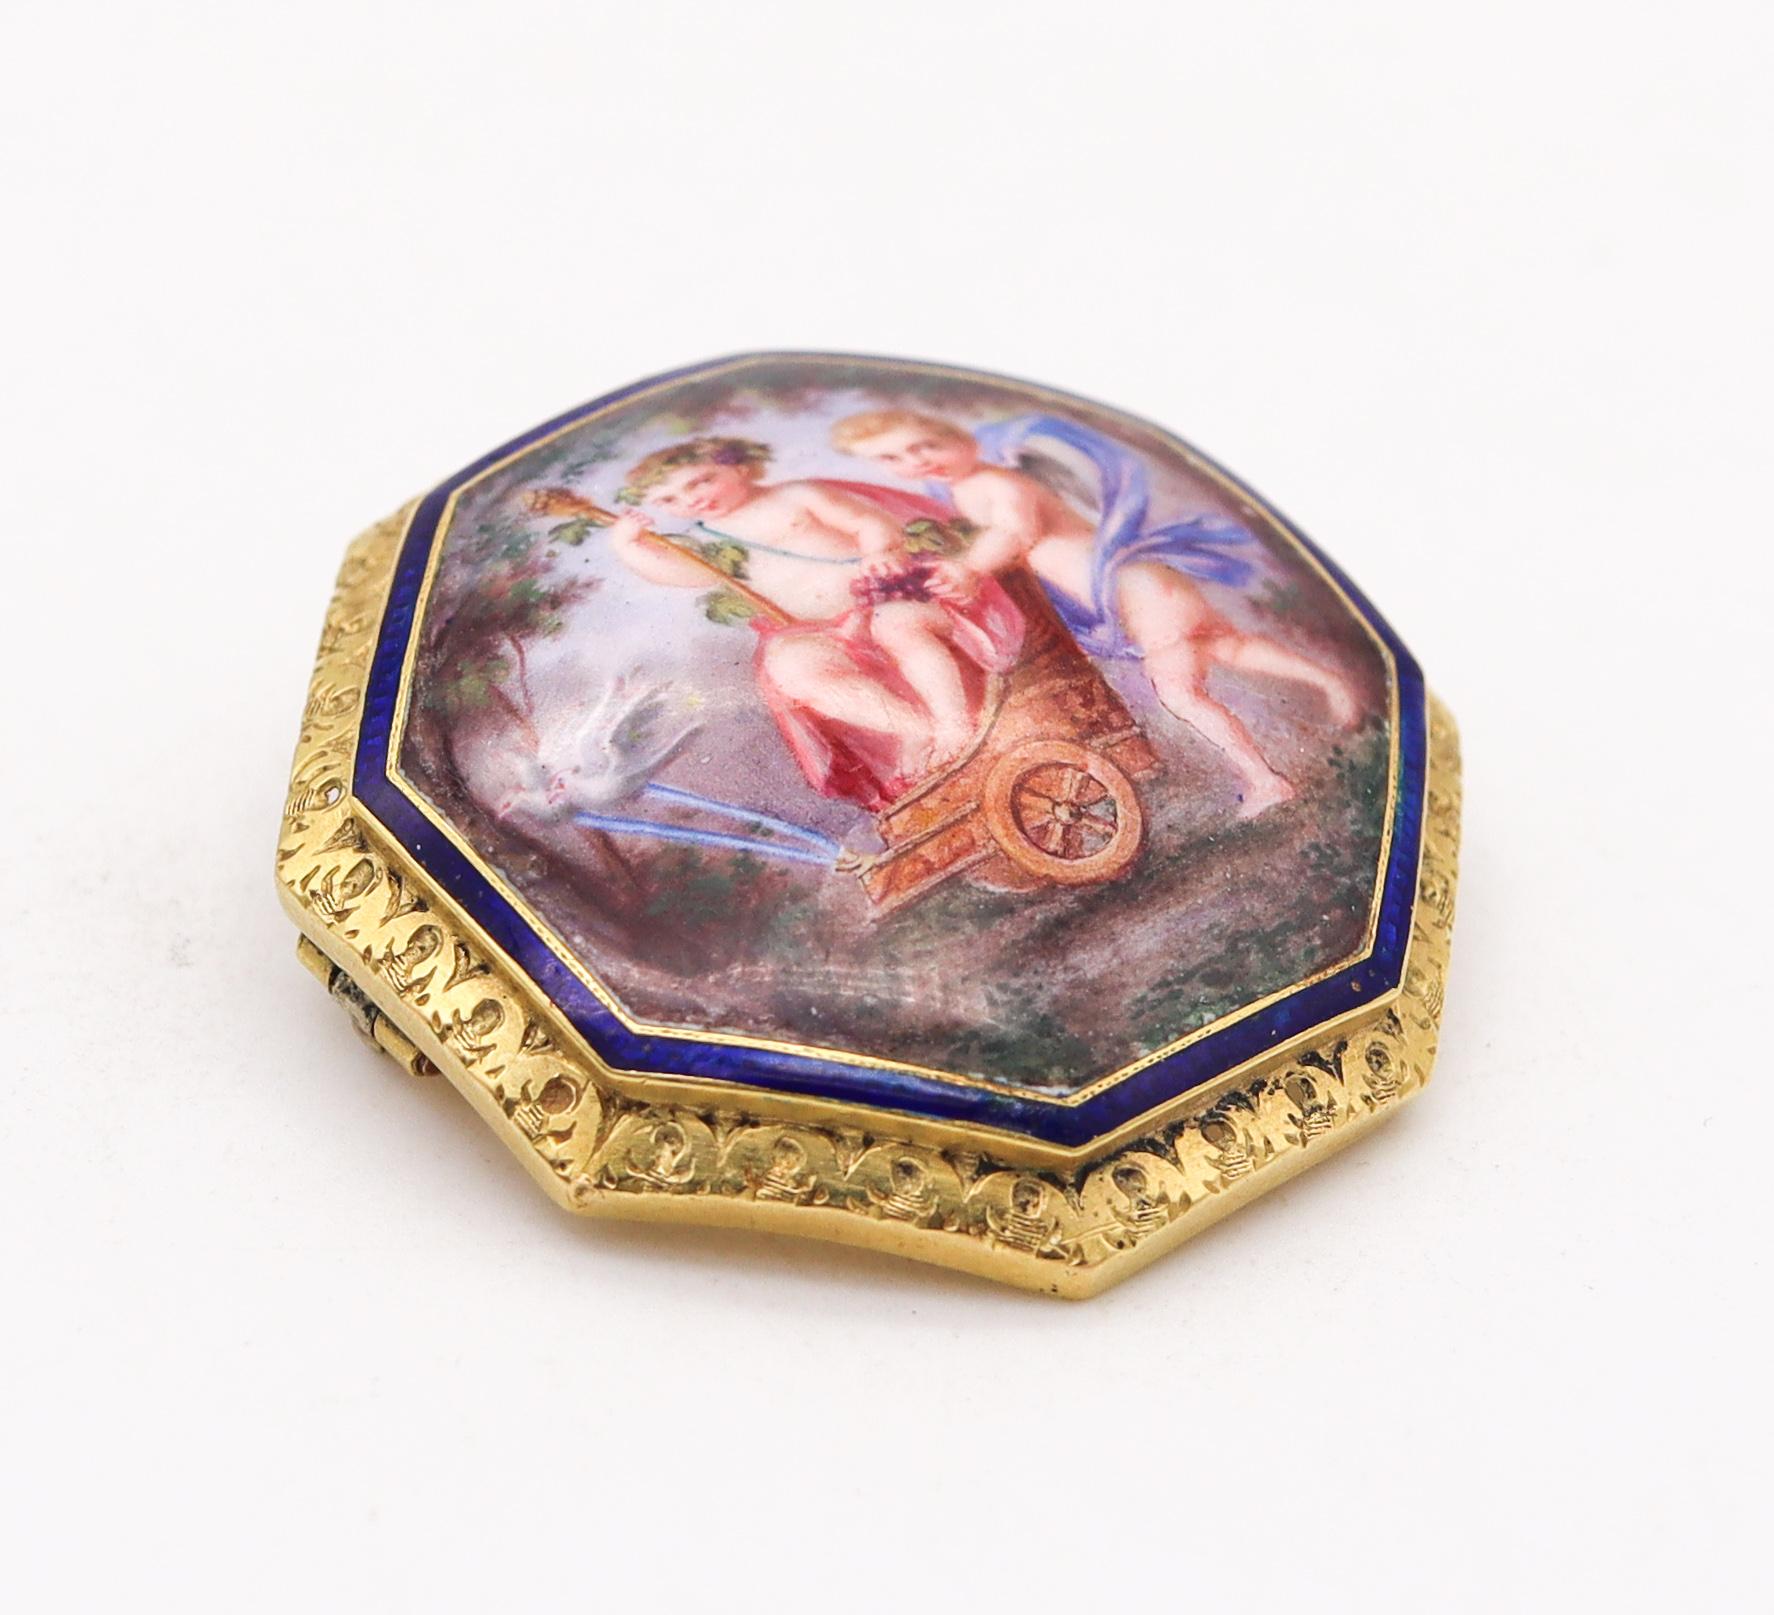 French enameled brooch with the triumph of Bacchus and cupid.

An exceptional neo-classic French piece, created in Paris in the first quarter of the 19th century, circa 1820. Made up in an octagonal bombe shape, carefully crafted in solid yellow